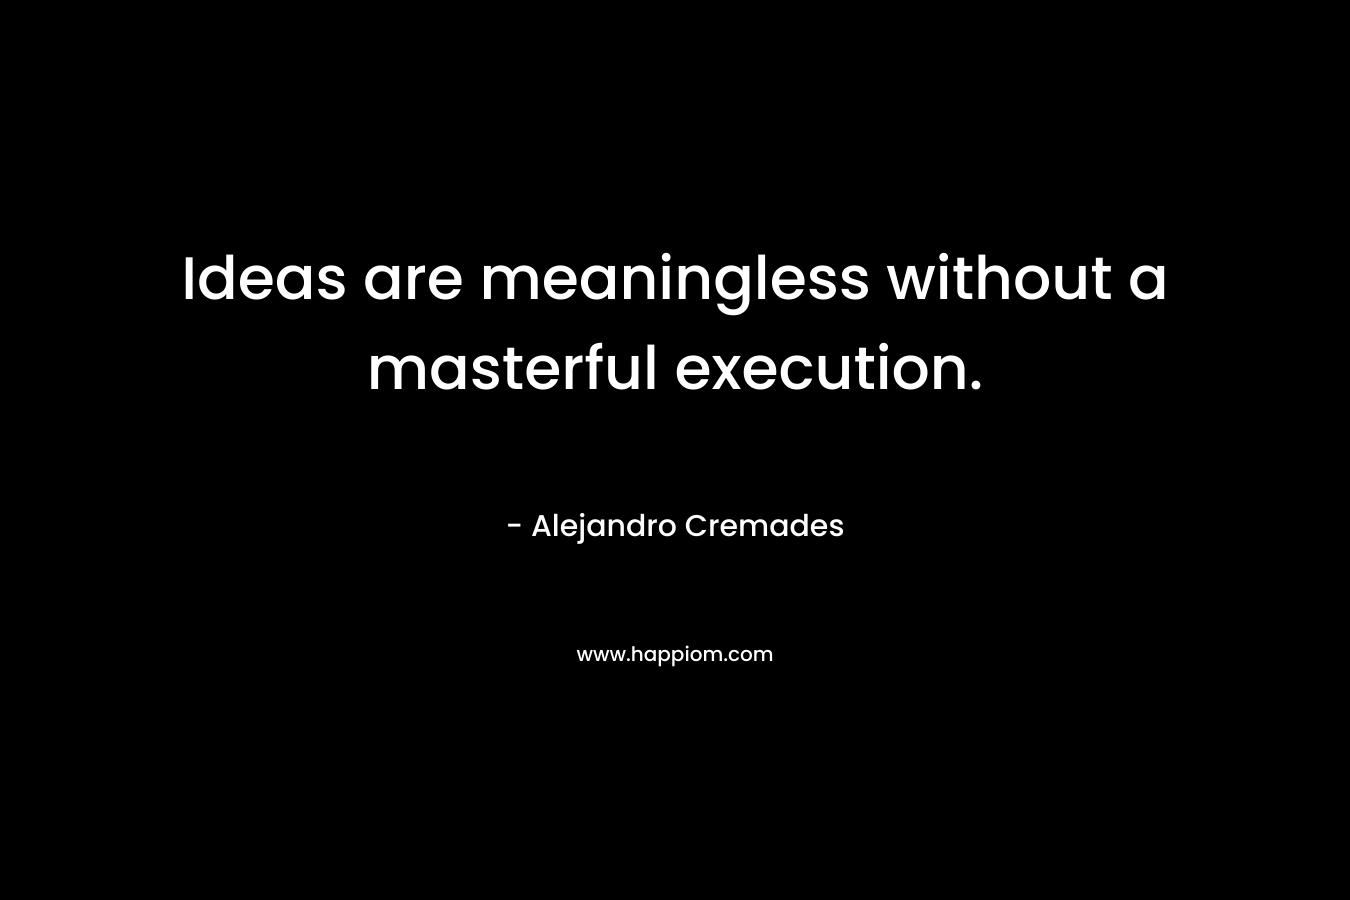 Ideas are meaningless without a masterful execution. – Alejandro Cremades